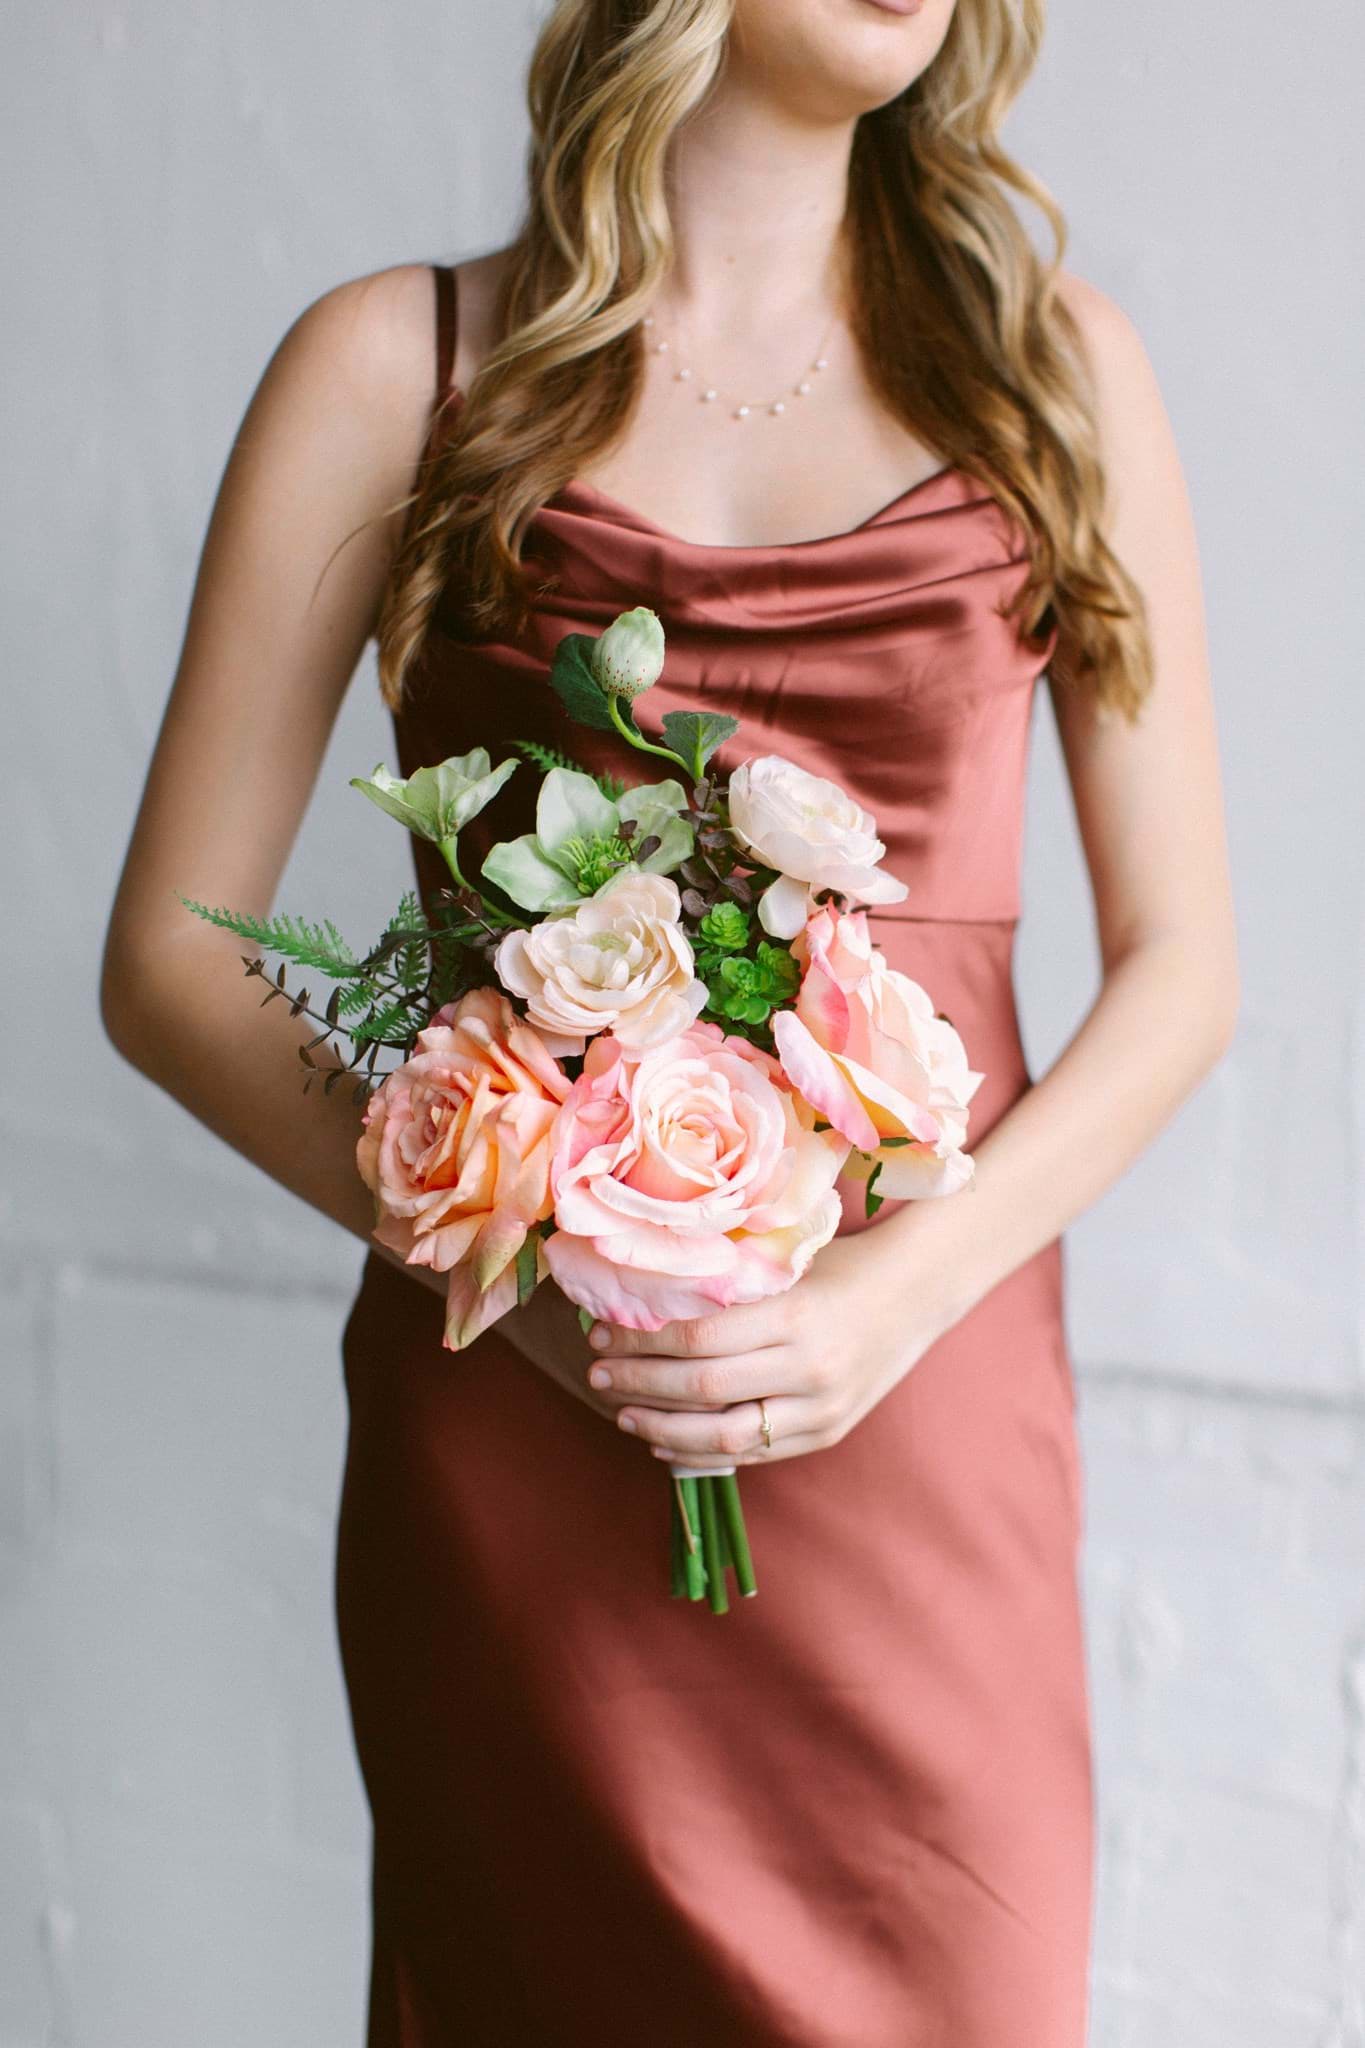 Silk Salmon and Apricot Colored Rose Bridal Bouquet, Something Borrowed  BloomsPremium Silk Flowers